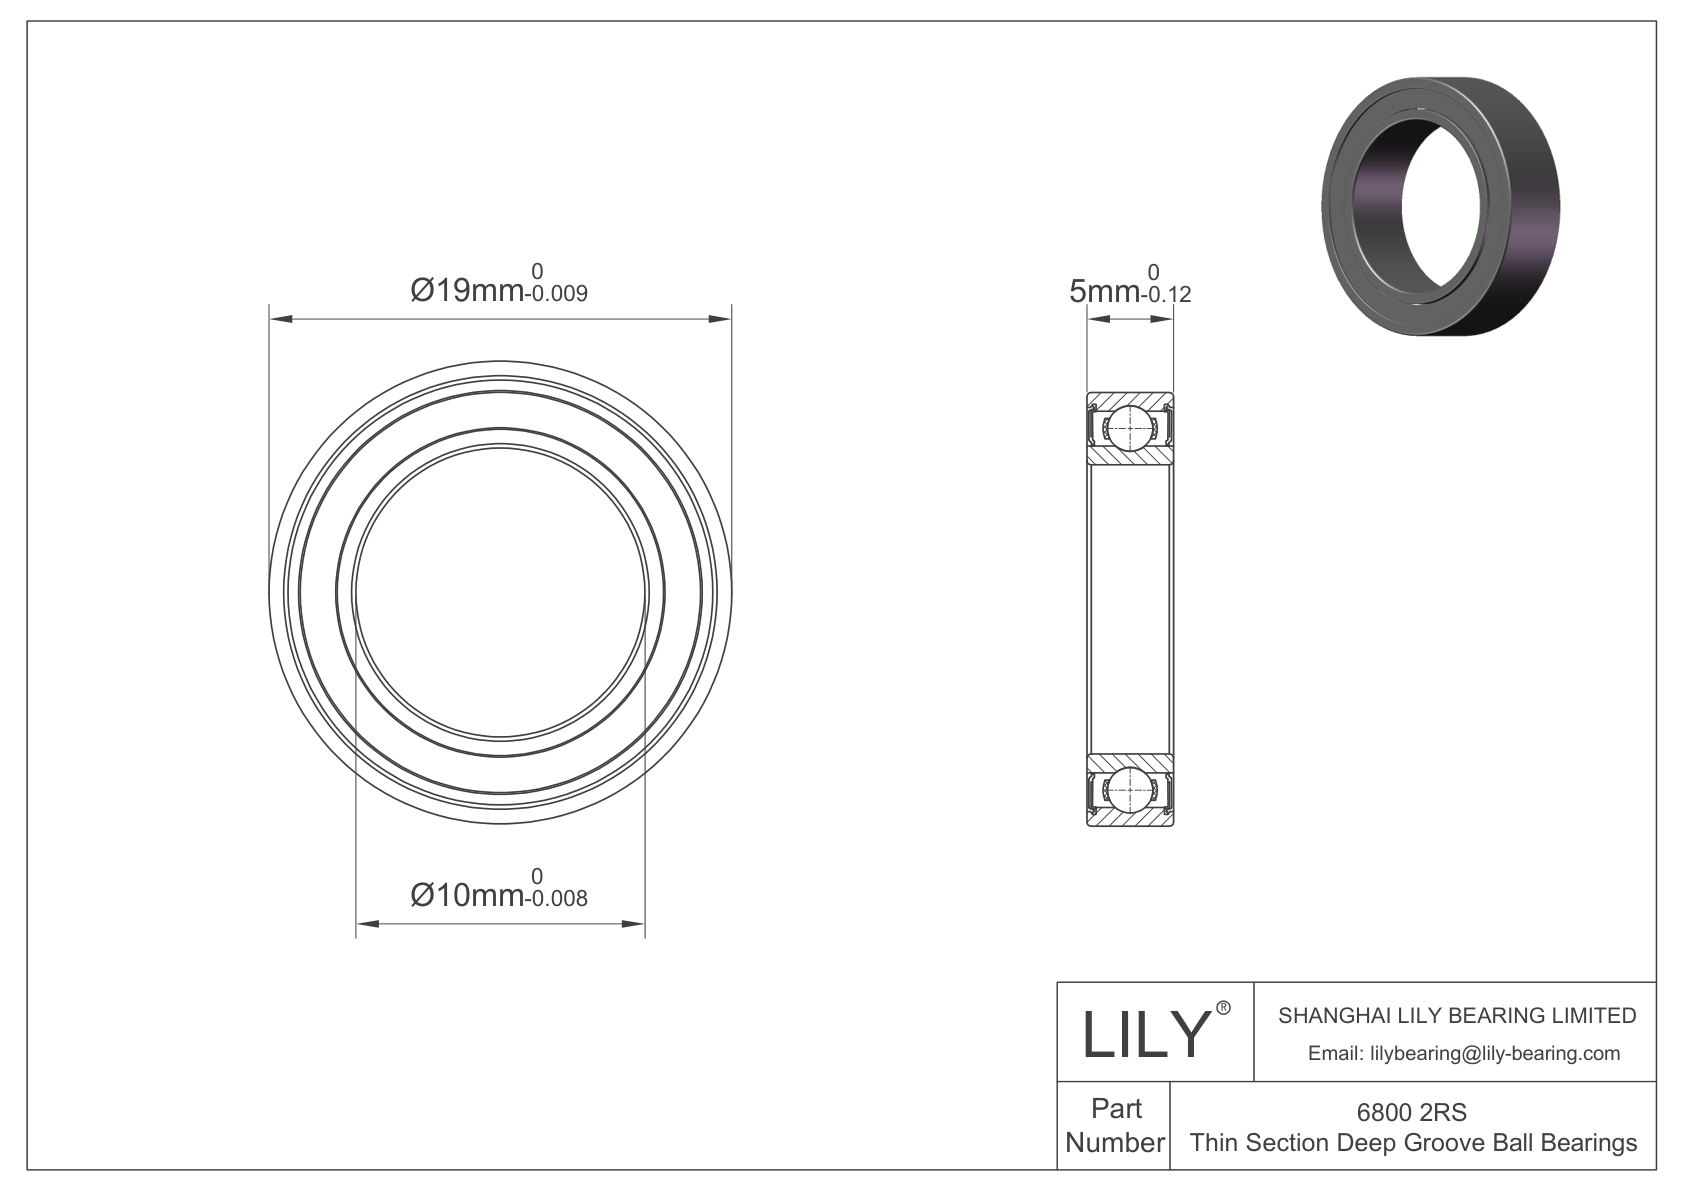 LILY-BST680035-50 Outsourcing POM bearings cad drawing